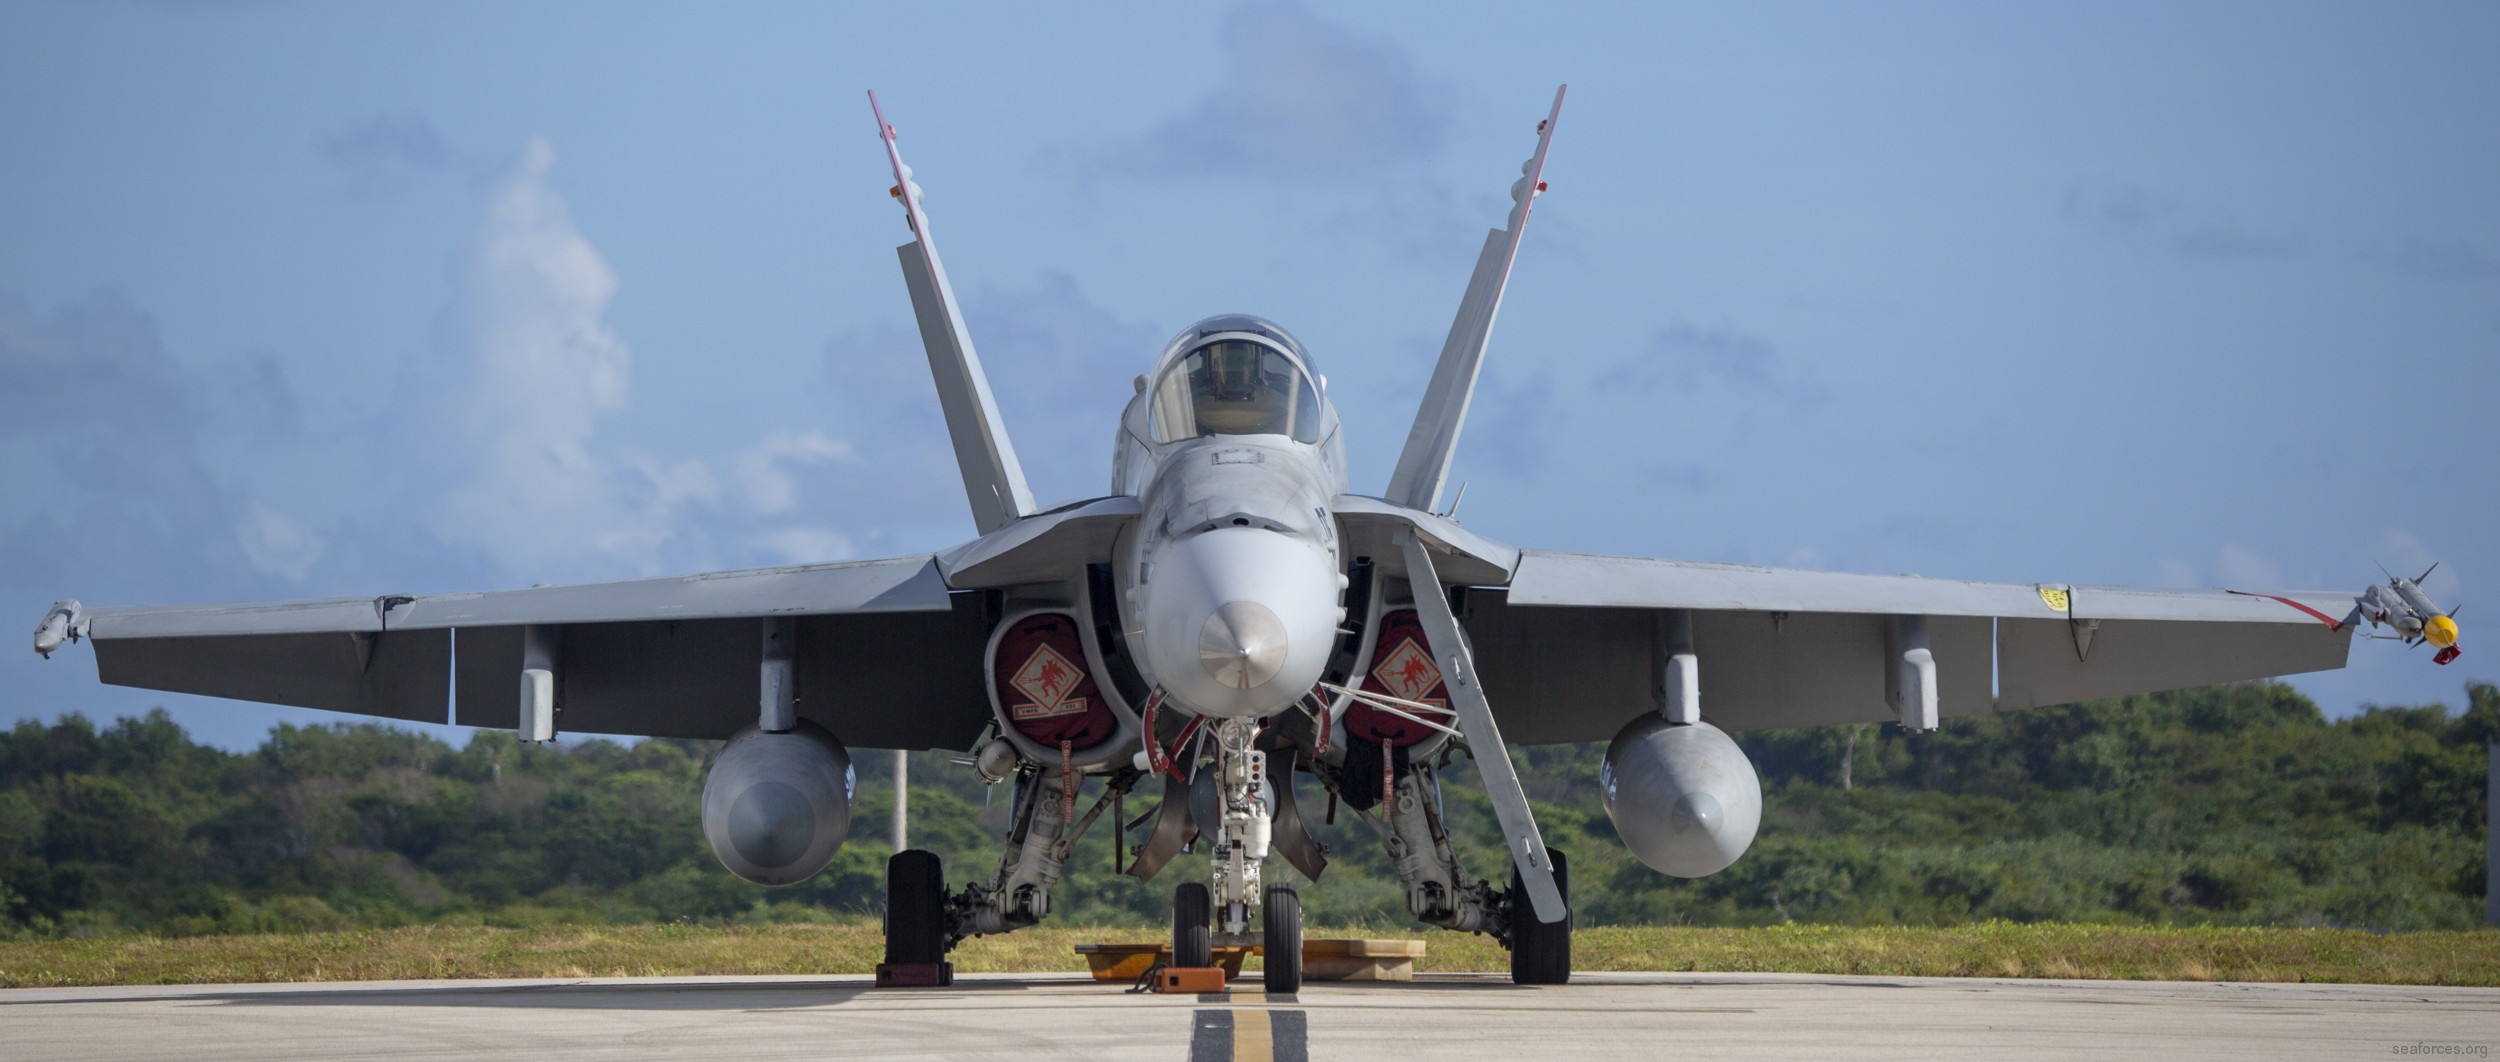 vmfa-232 red devils marine fighter attack squadron usmc f/a-18c hornet 32 andersen air force base guam